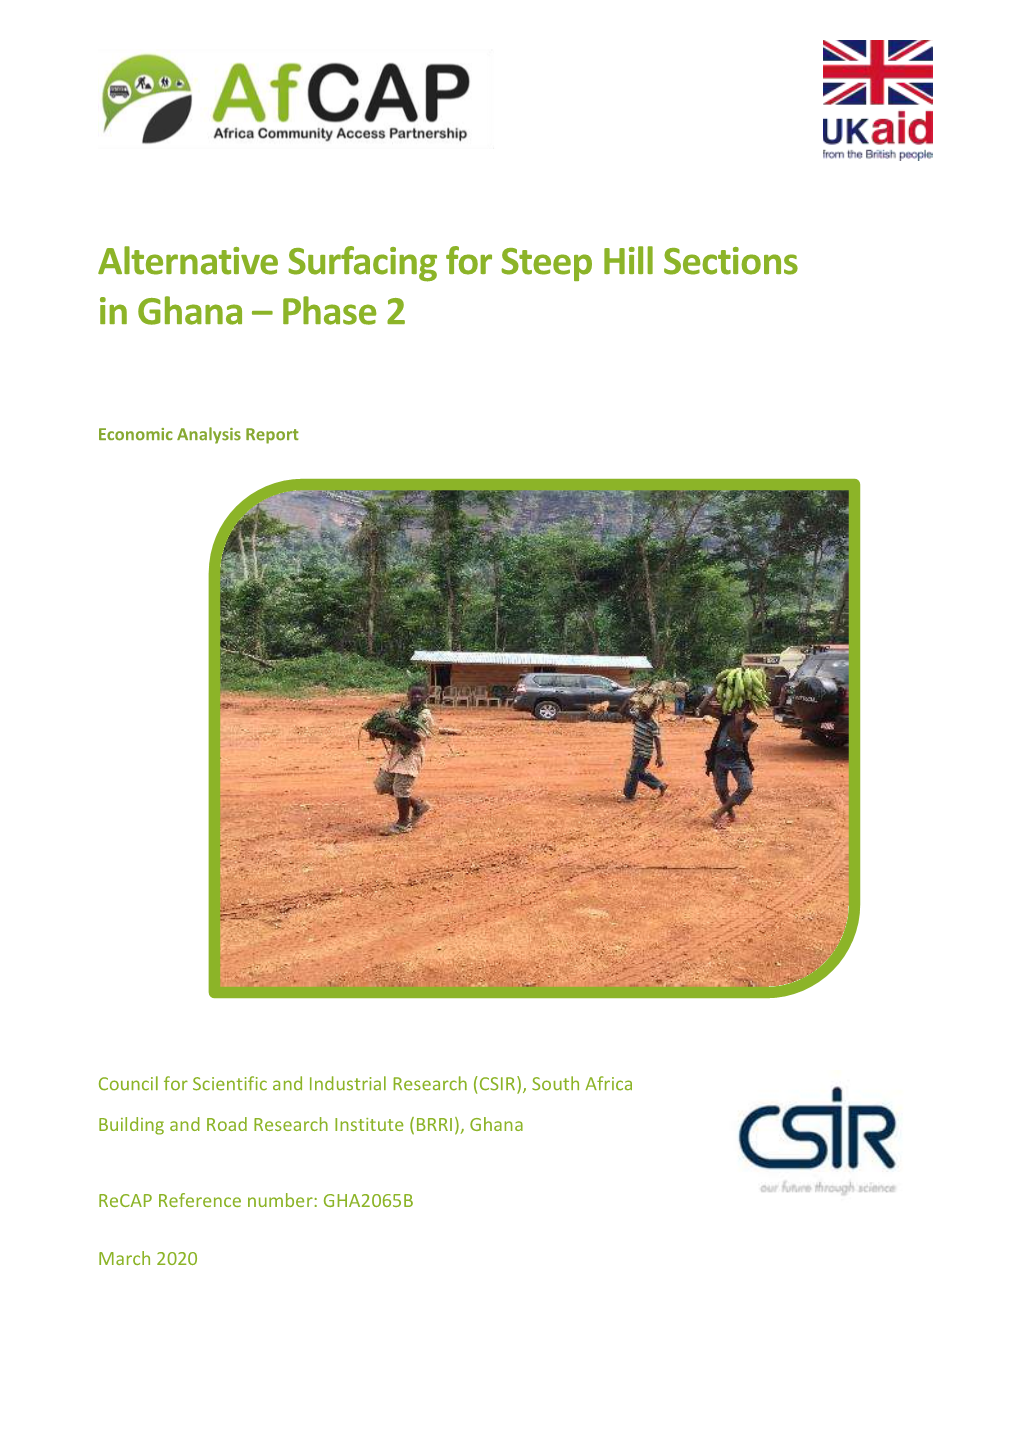 Alternative Surfacing for Steep Hill Sections in Ghana – Phase 2